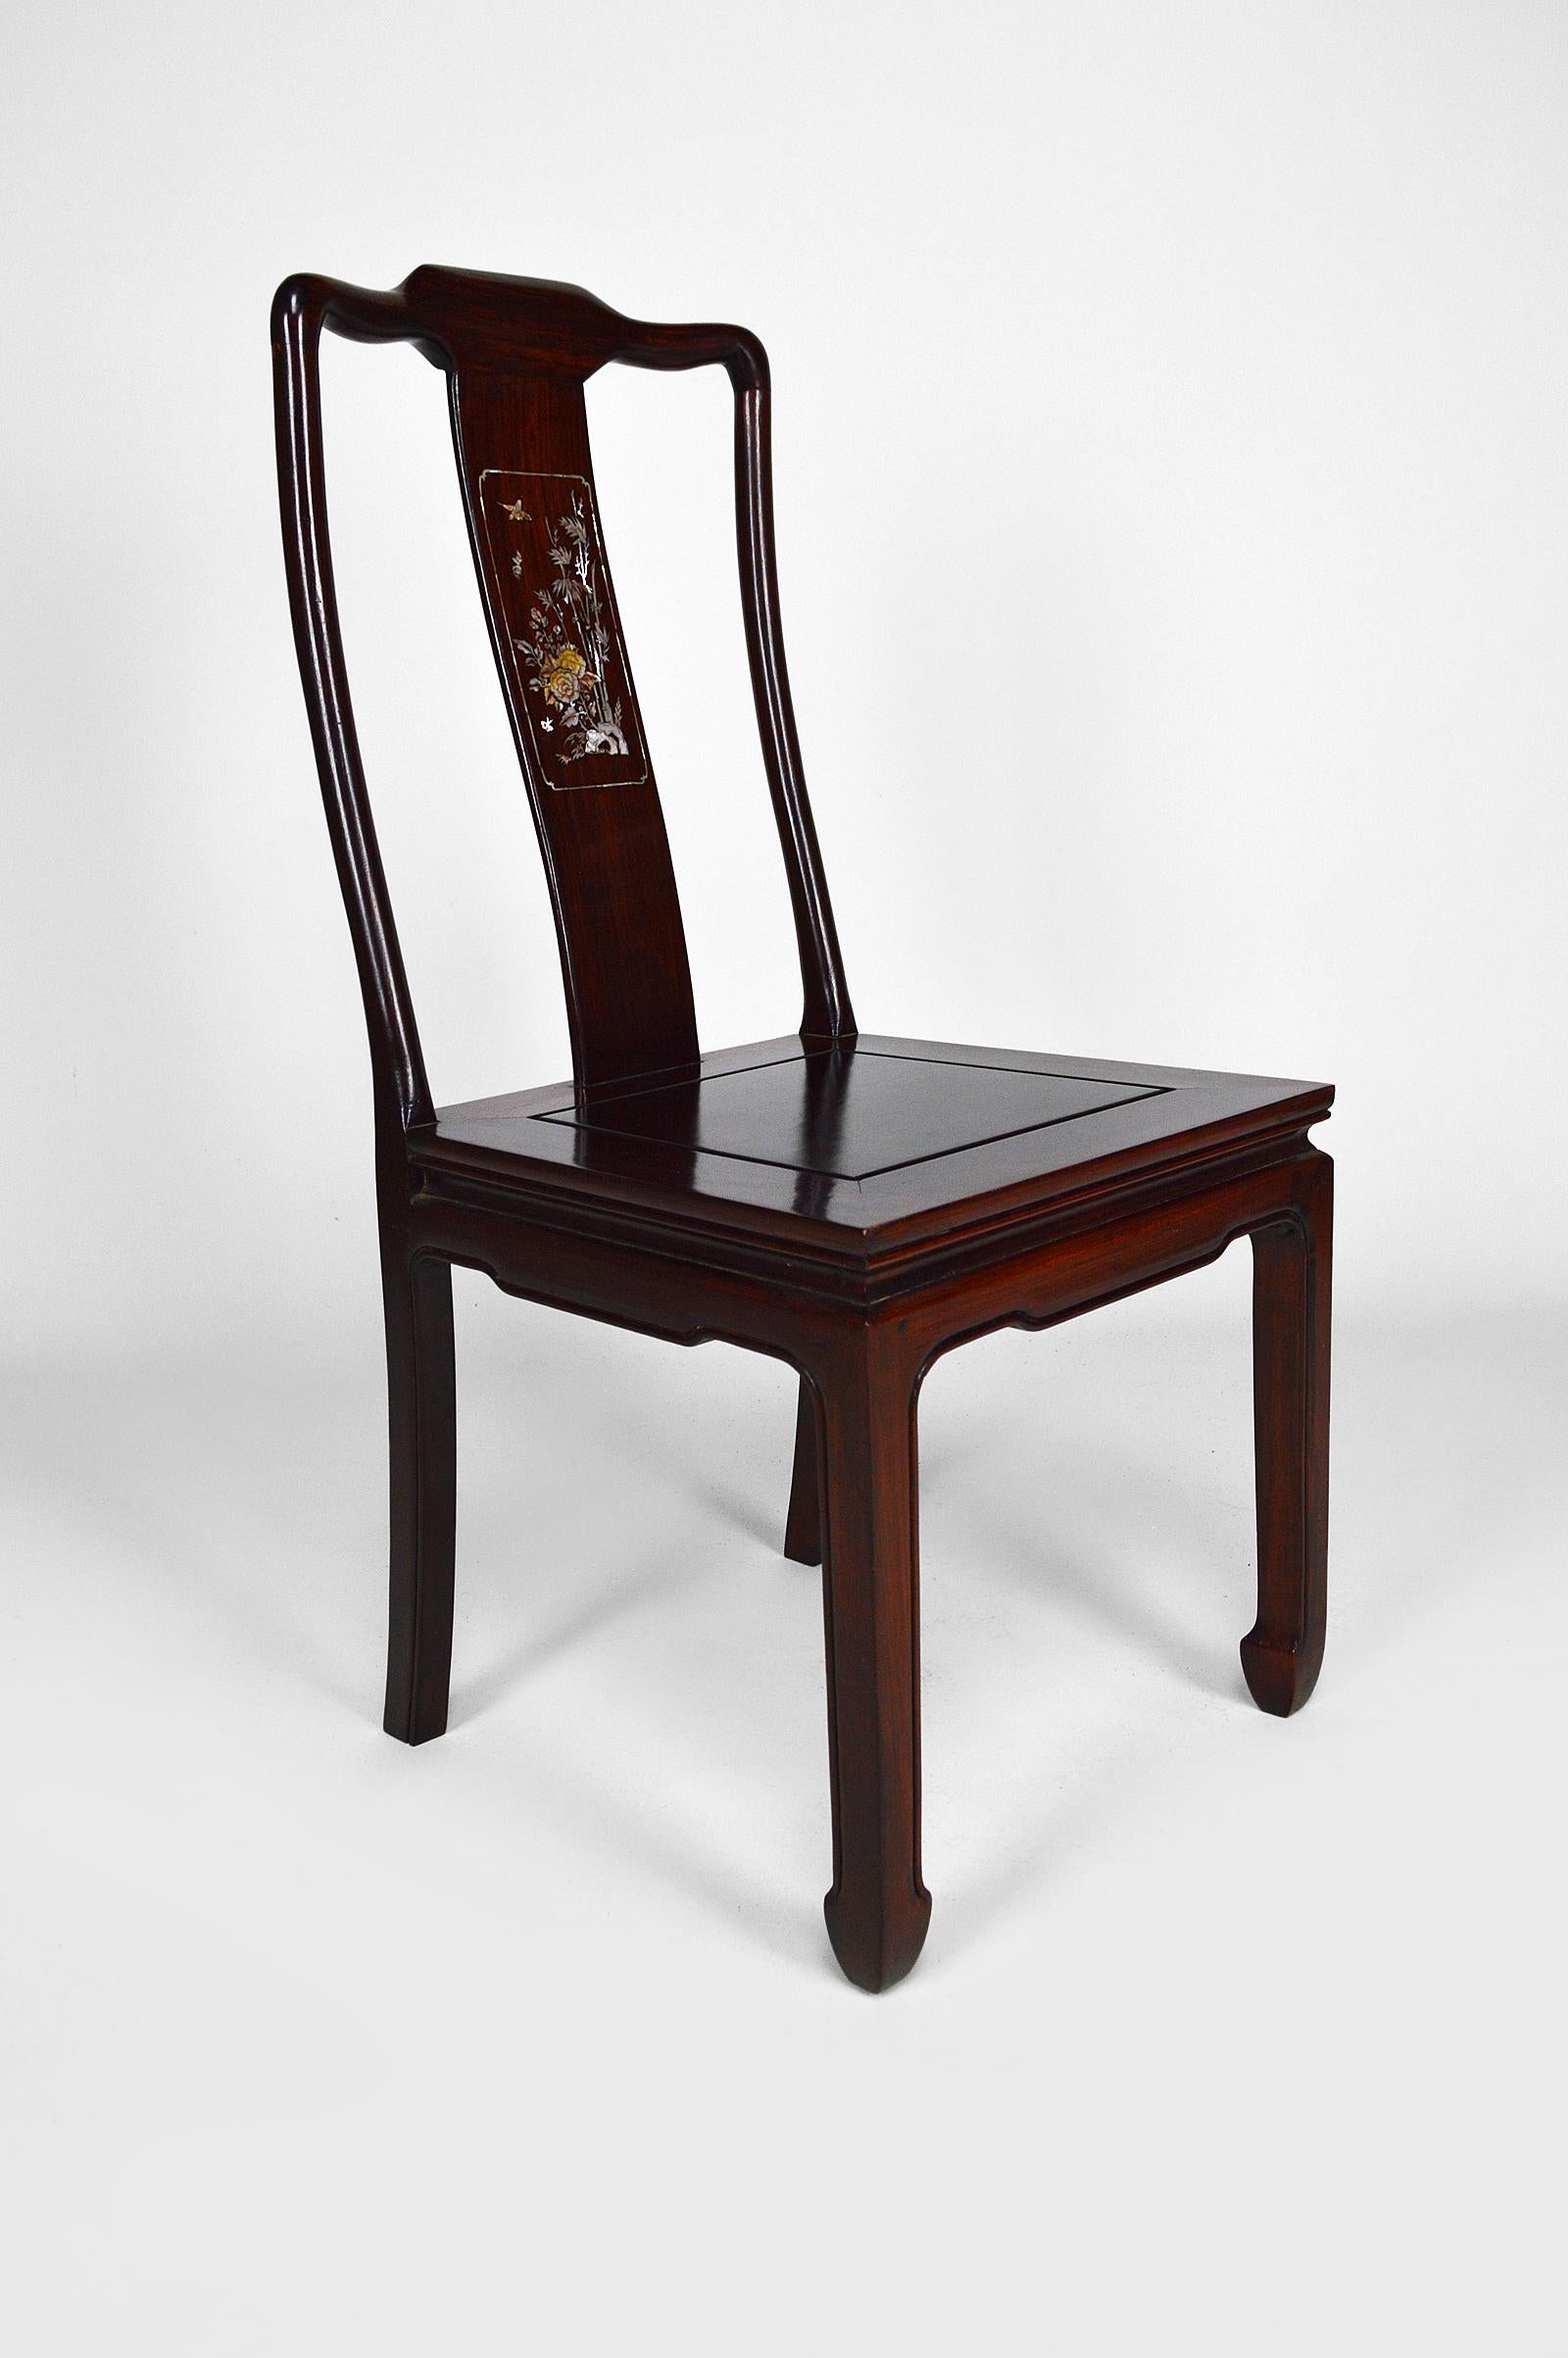 Set of 5 Asian Inlaid Wooden Chairs, Mid-20th Century 3